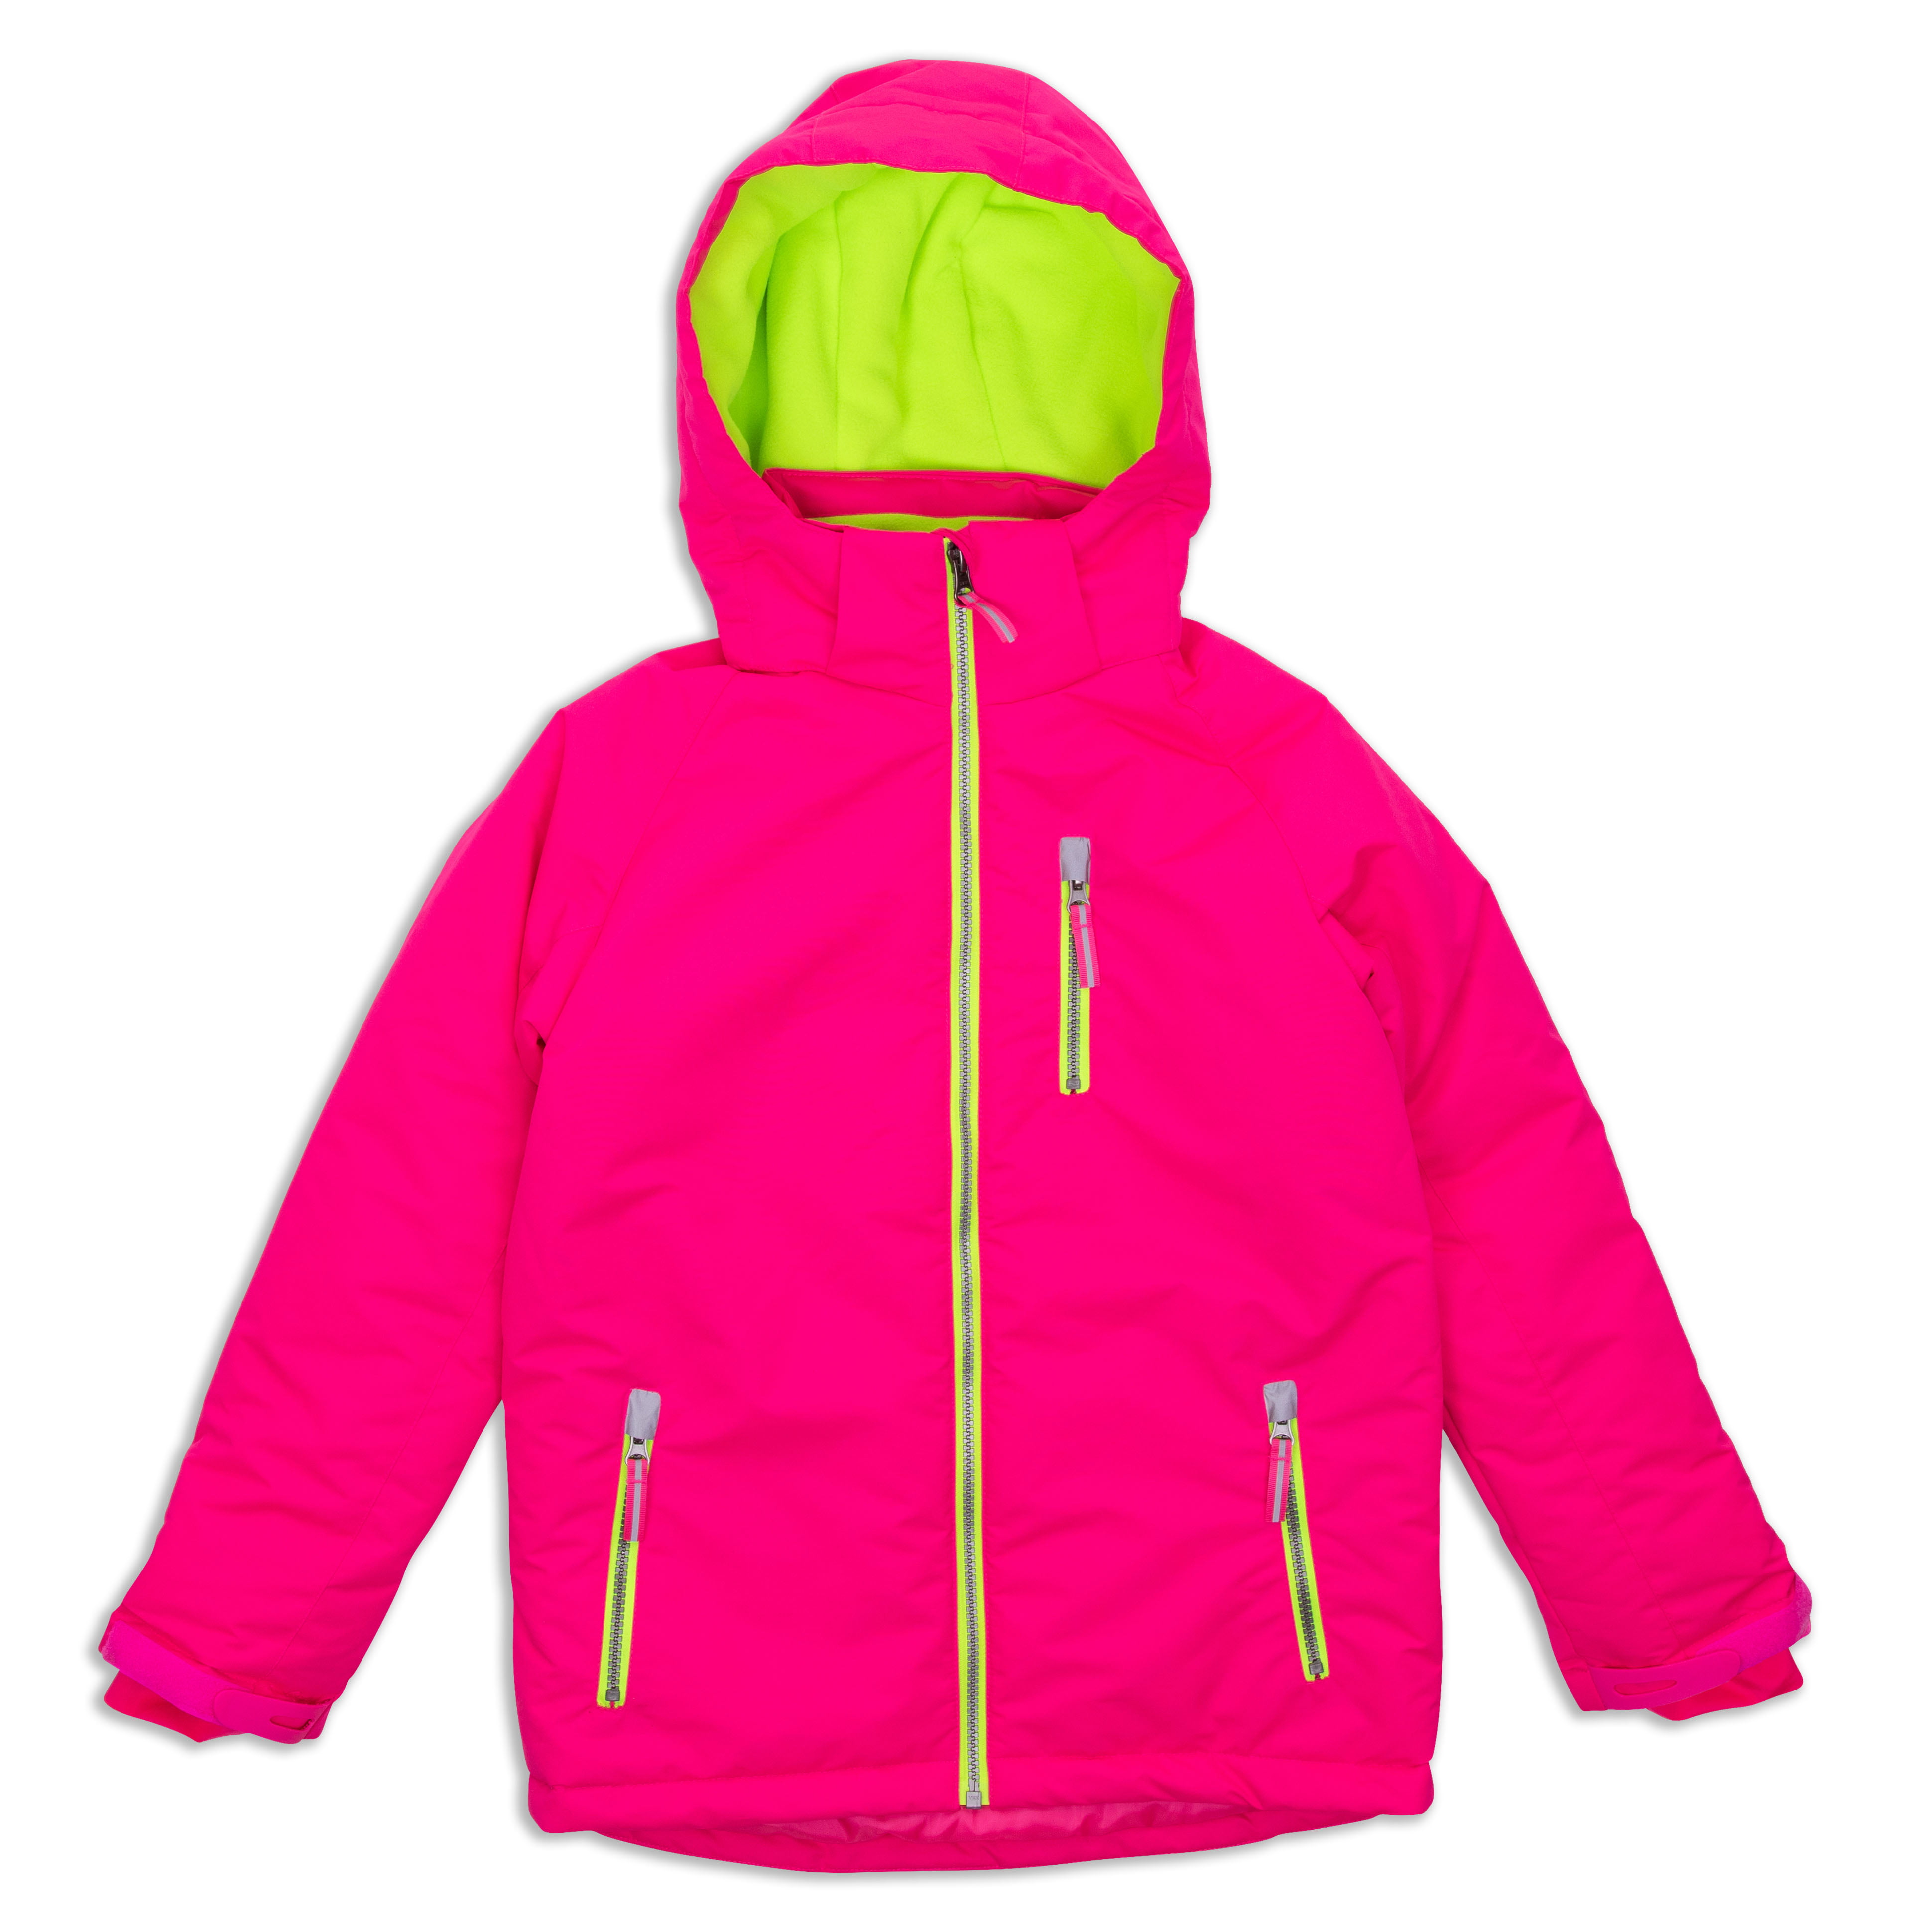 Arctic Quest Girls Windproof Water-Resistant Insulated Hooded Winter Snow and Ski Jacket with Zippered Pockets 